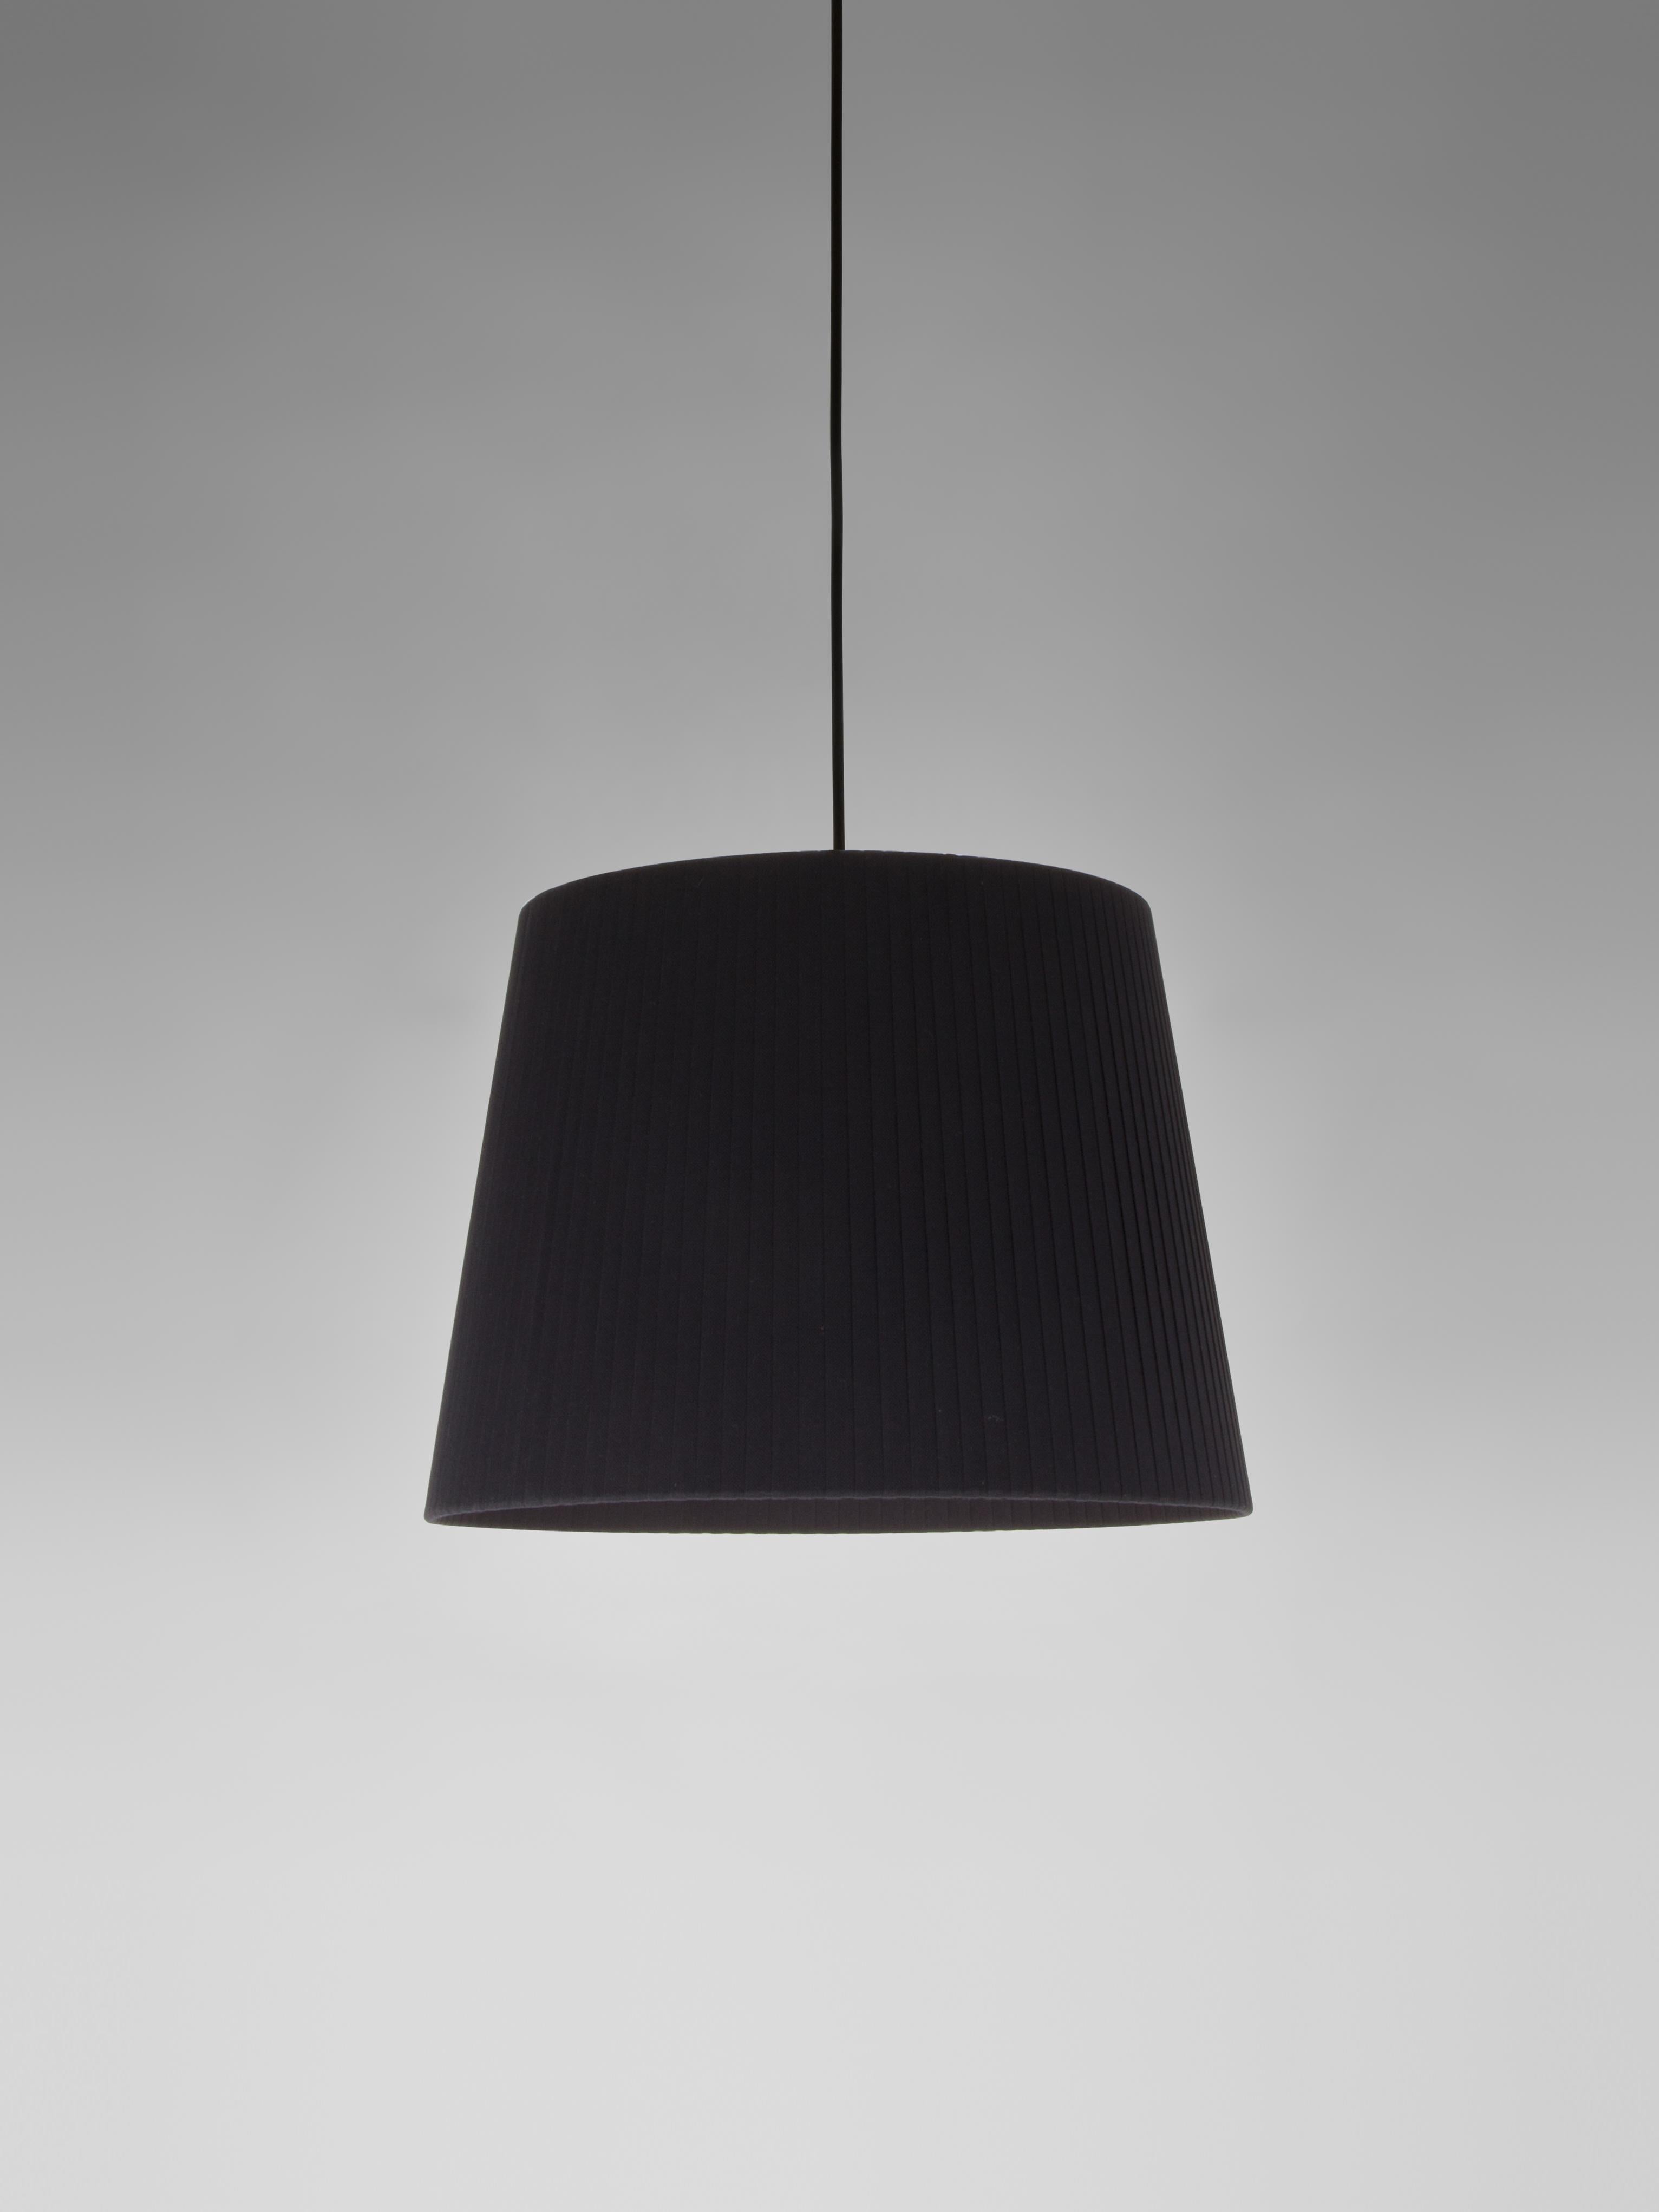 Black Sísísí Cónicas GT3 pendant lamp by Santa & Cole
Dimensions: D 36 x H 27 cm
Materials: metal, ribbon.
Available in other colors.

The conical shape group has multiple finishes and sizes. It consists of four sizes: PT1, MT1, GT1 and GT3,